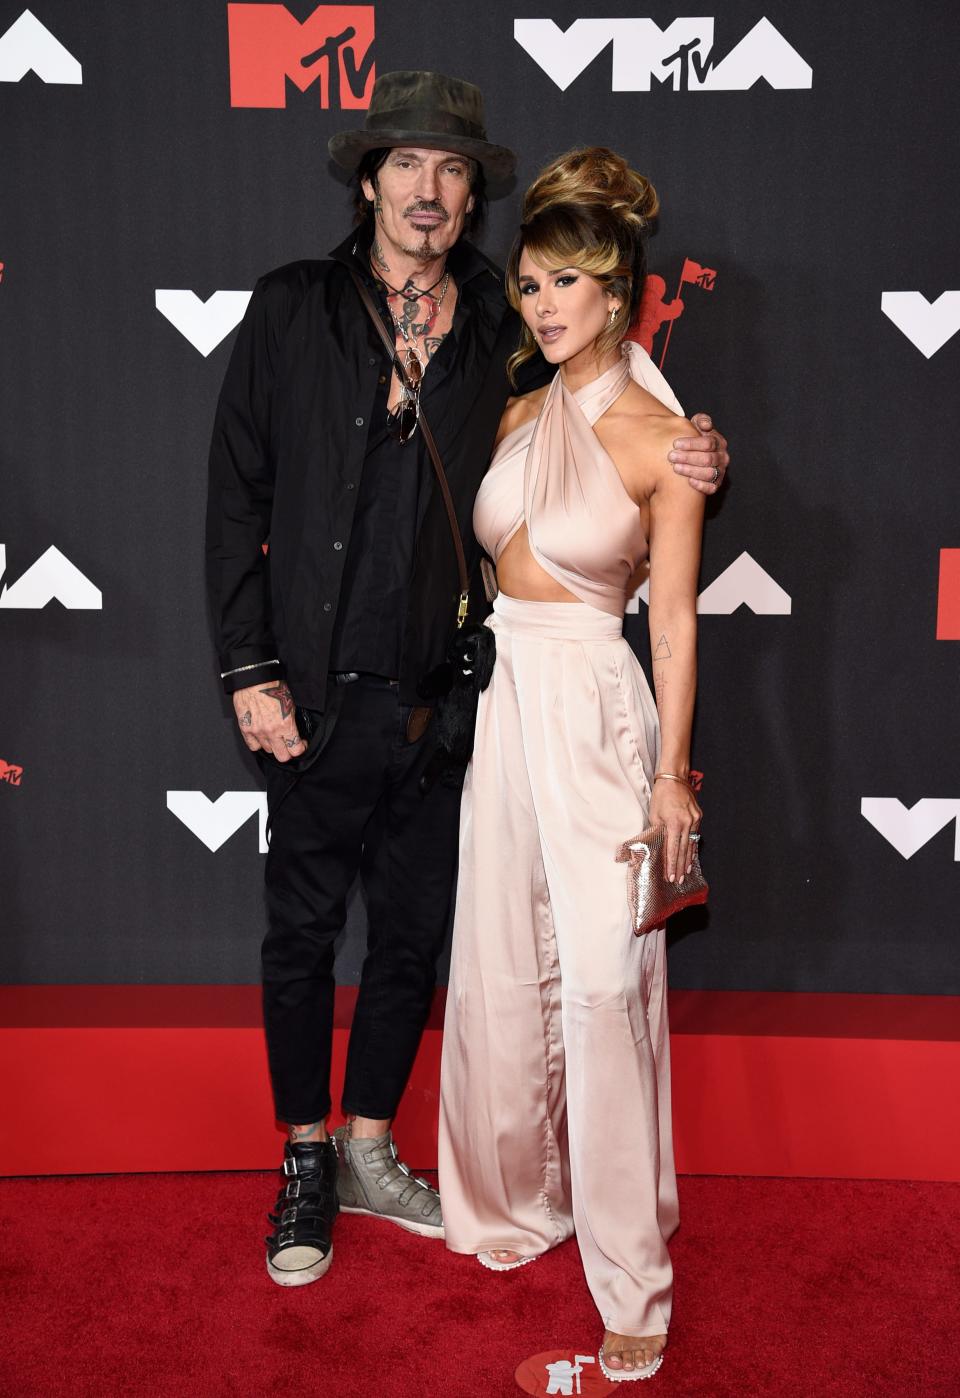 Brittany Furlan and Tommy Lee tied the knot on Valentine's Day in 2019.